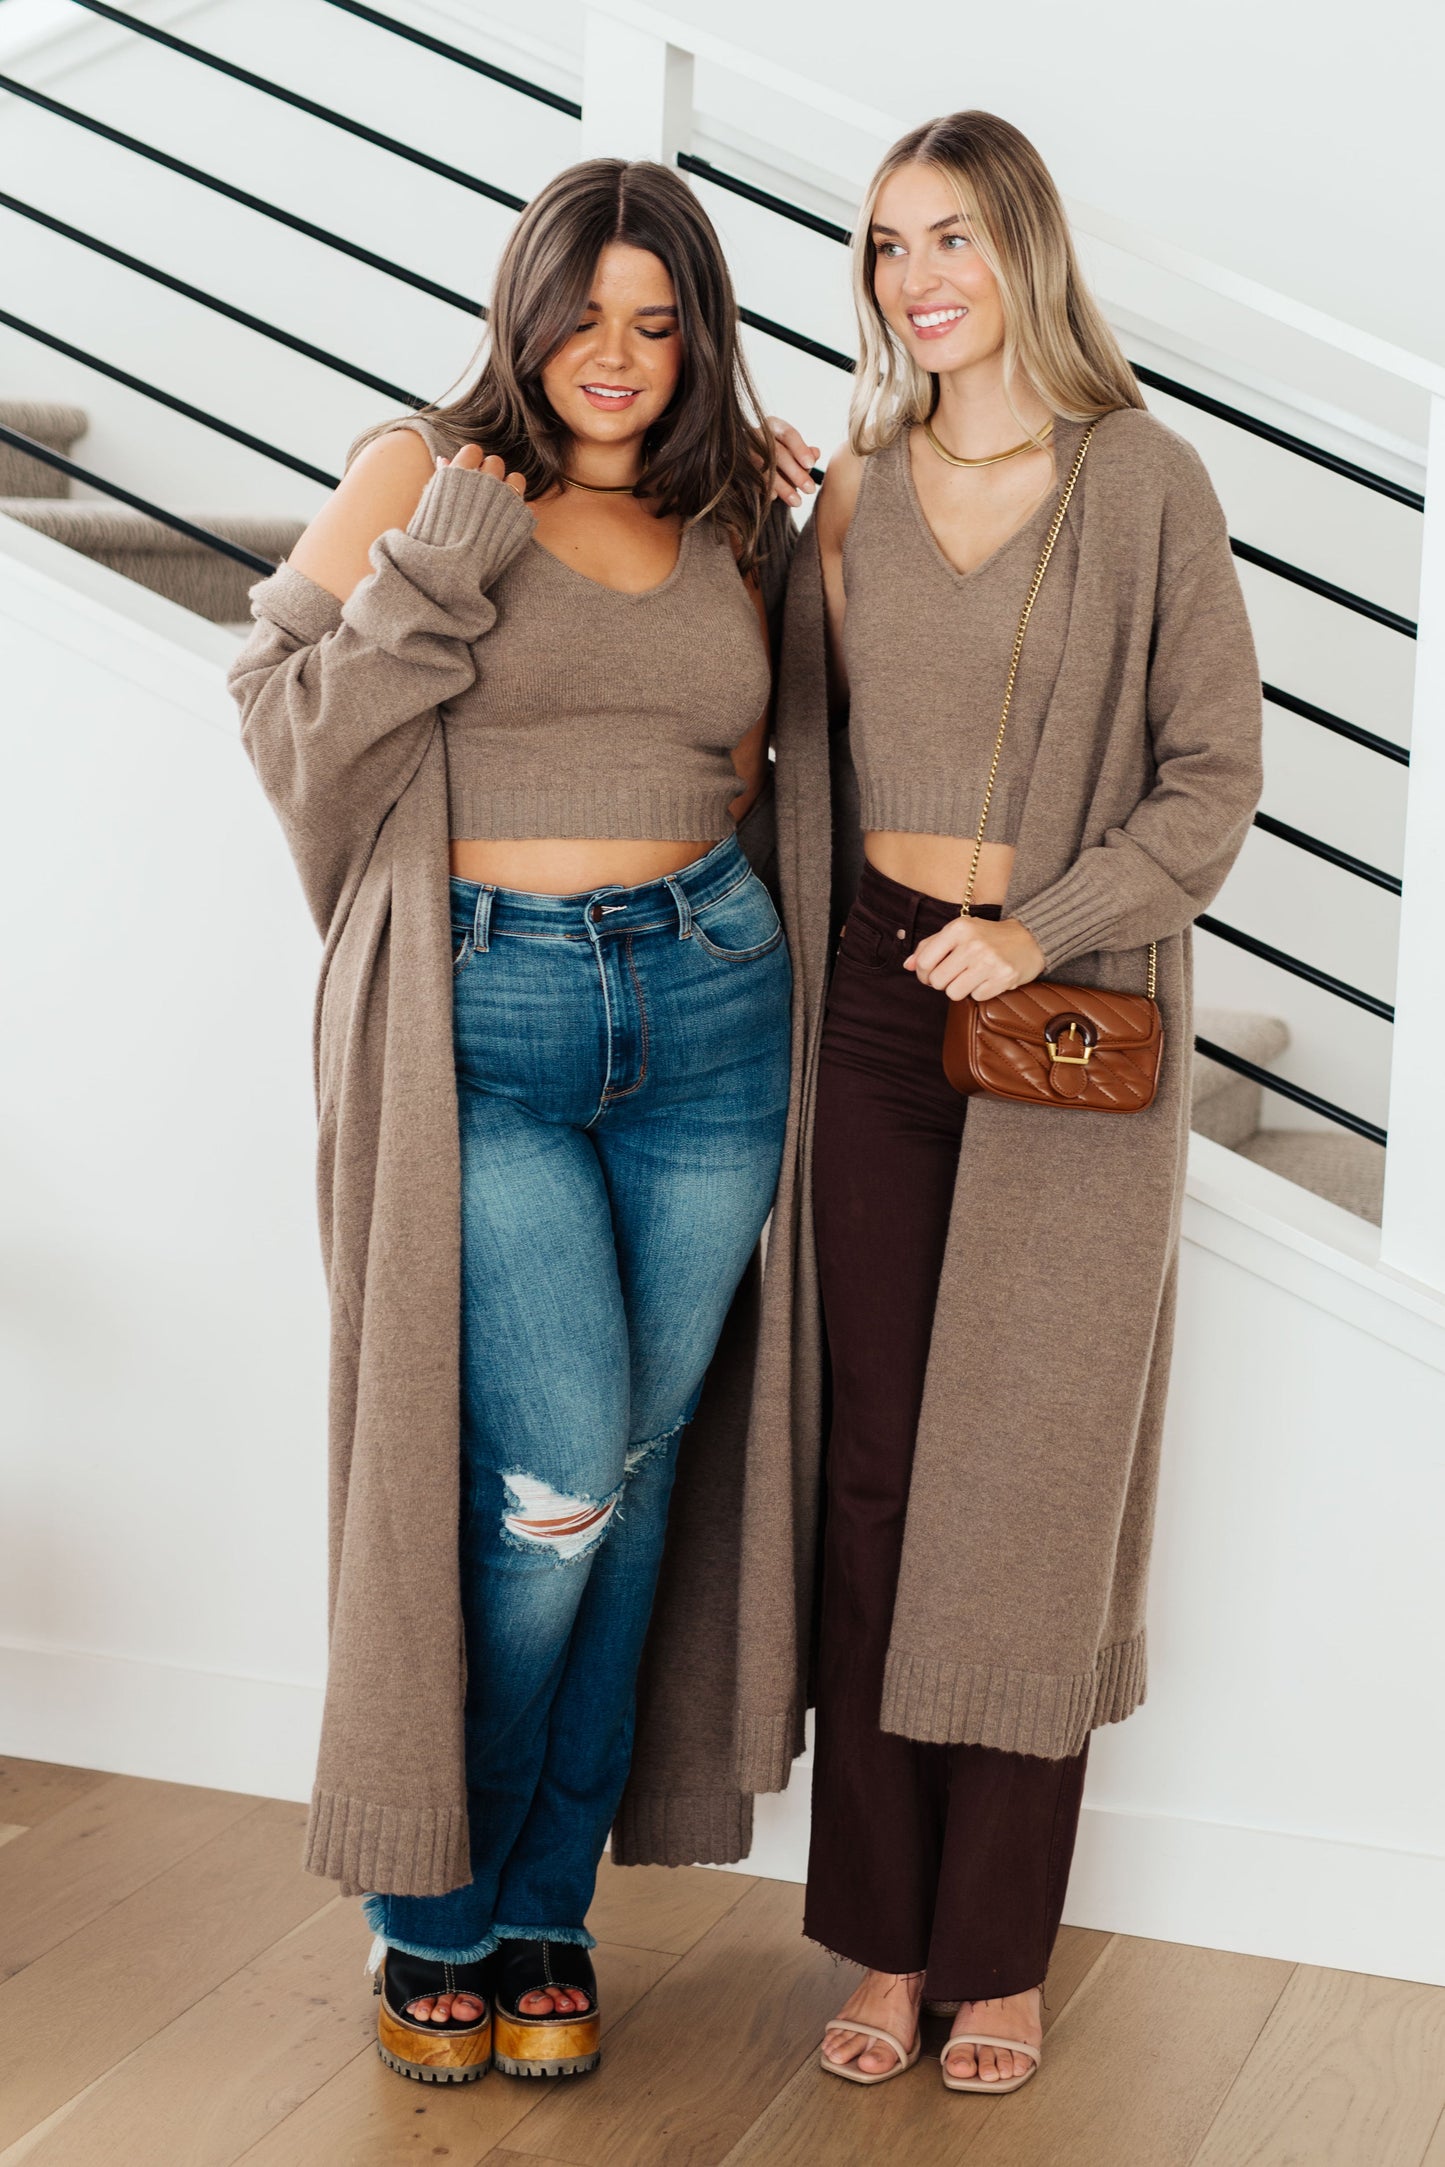 Upgrade your wardrobe this season with this Perfectly Resolved Duster Cardigan. Featuring a warm sweater knit, neutral tone, and duster length, this cardigan pairs perfectly with the perfectly resolved sweater tank for a beautiful timeless look in SLO. plus size